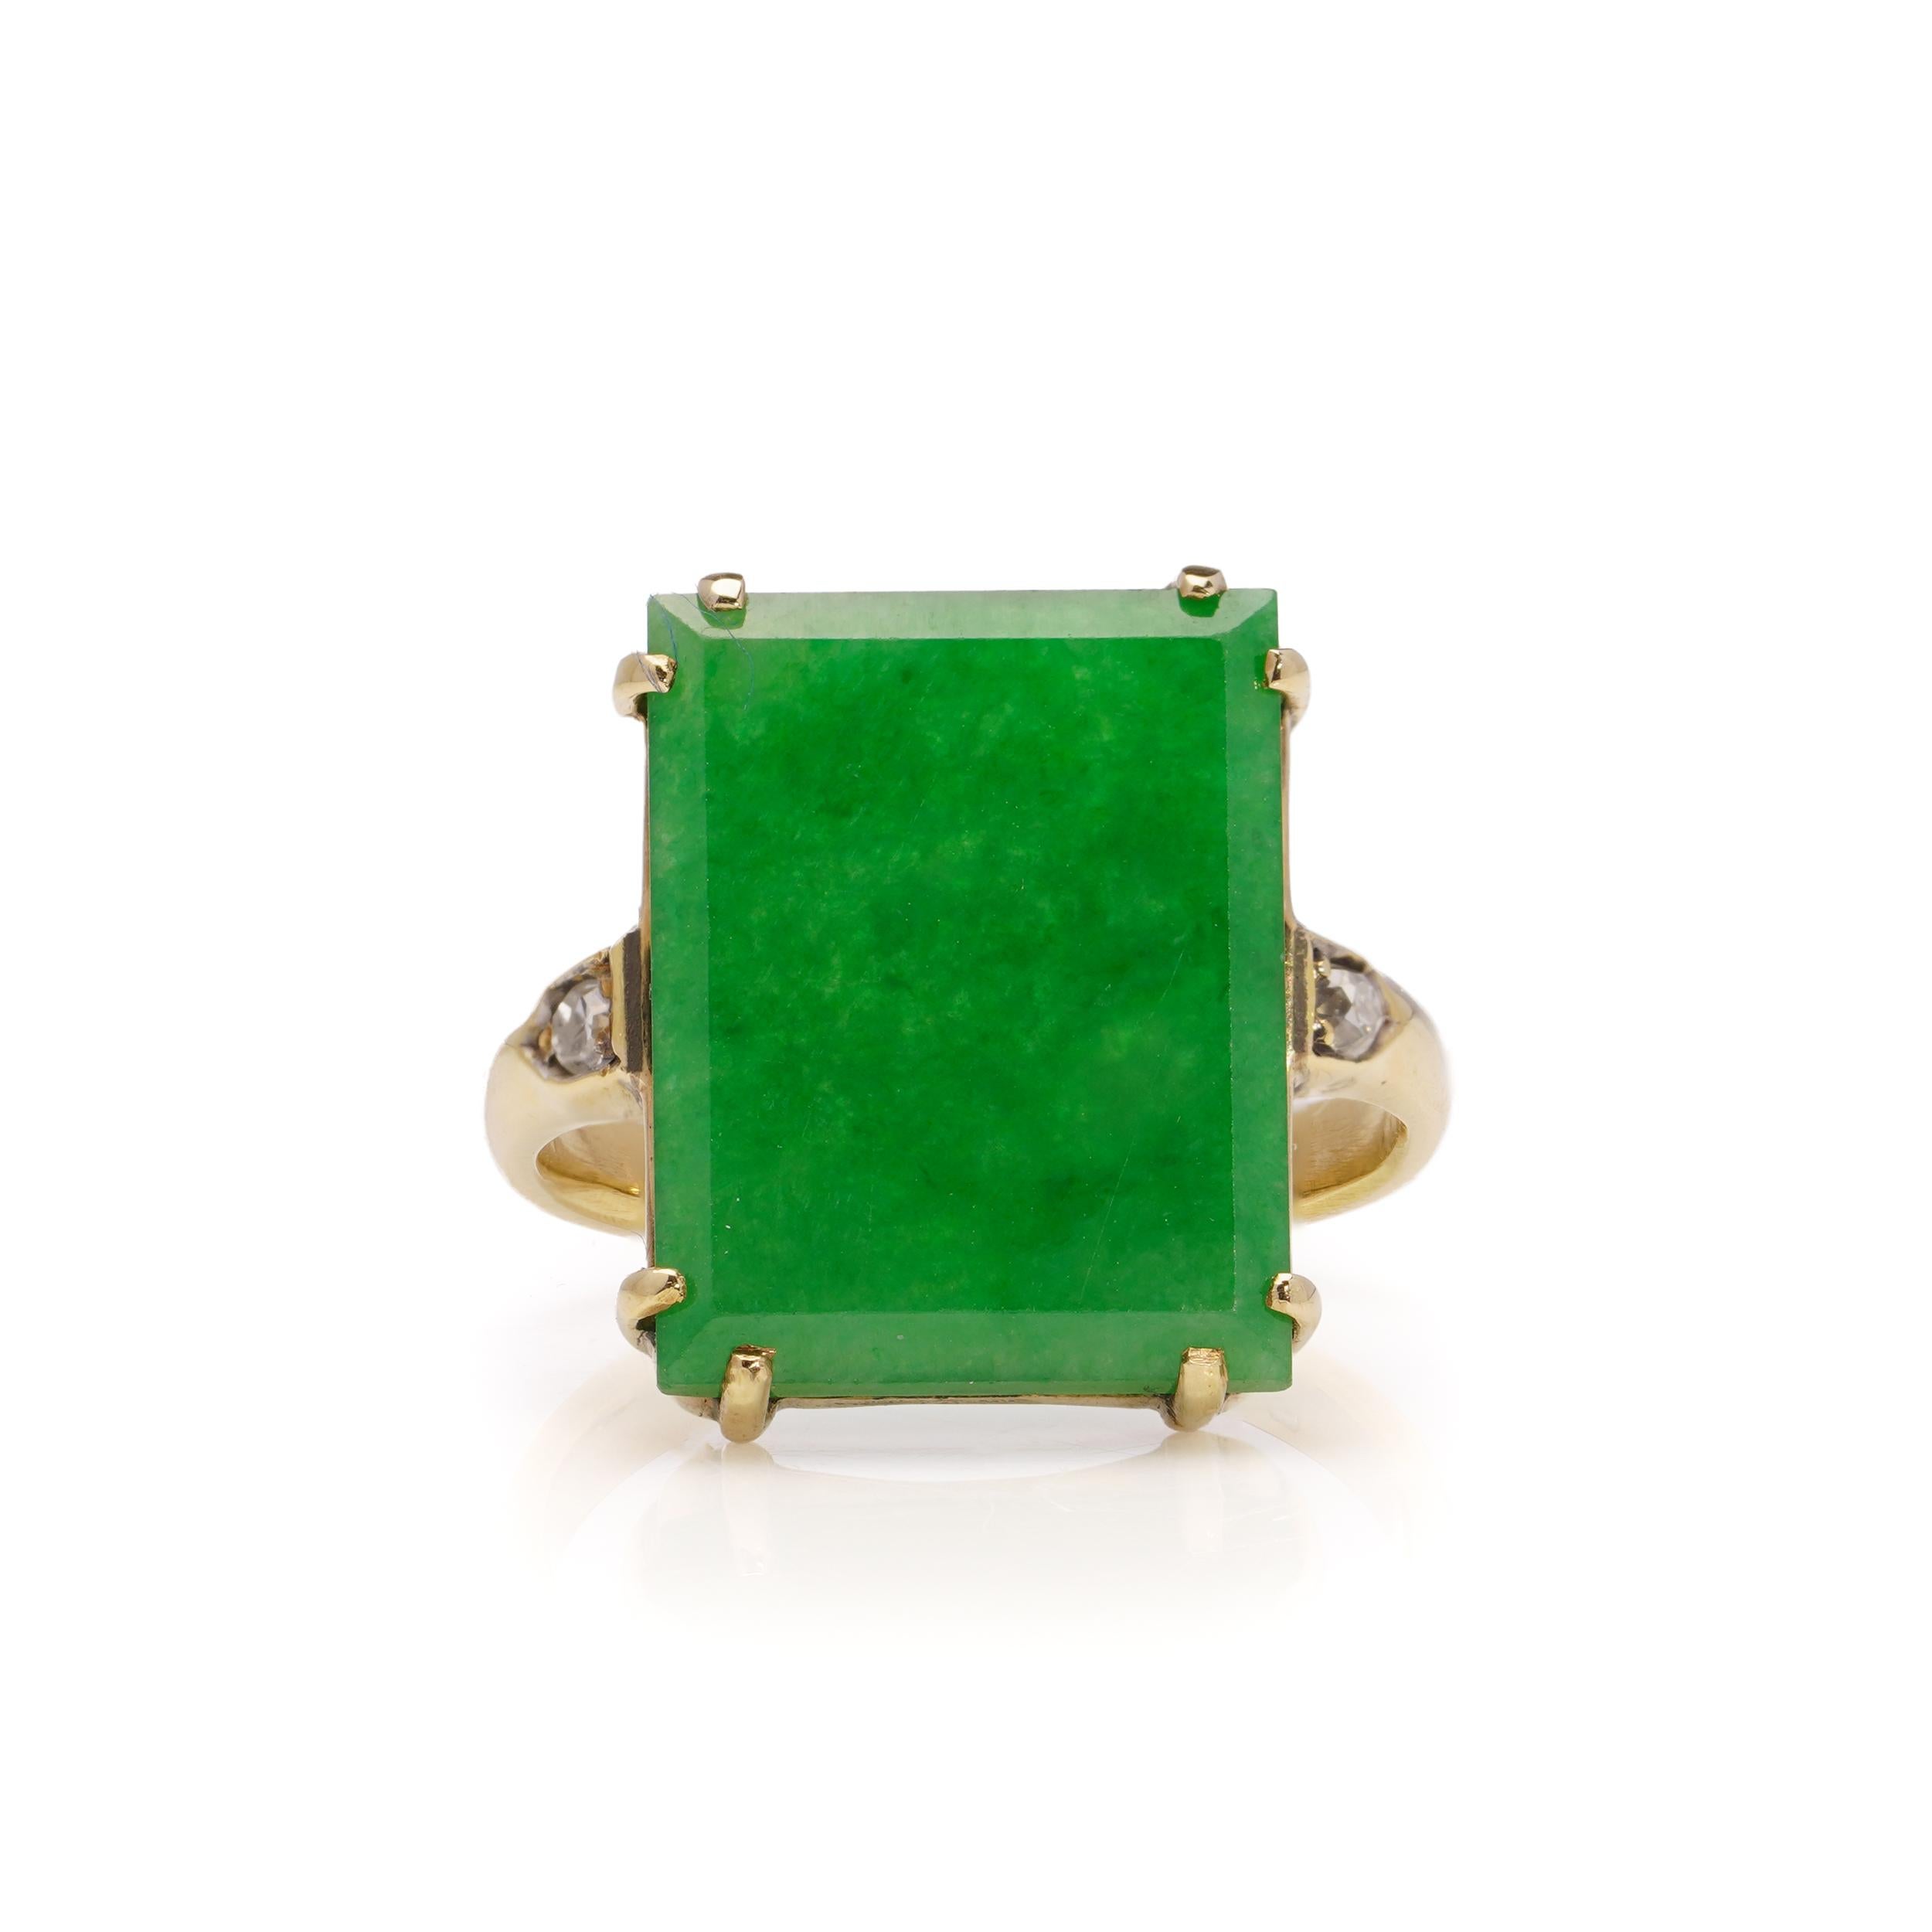 Vintage 18 kt. Yellow gold rectangular-shaped jade and diamond ring.
Made in England, Birmingham, 1929
Maker: H.A ( unidentified )
Fully hallmarked.

Dimensions -
Ring Size (UK) = K (EU) = 52 (US) = 5.5
Ring size: 2.3 x 1.8 x 1.7 cm 
Weight: 3.7